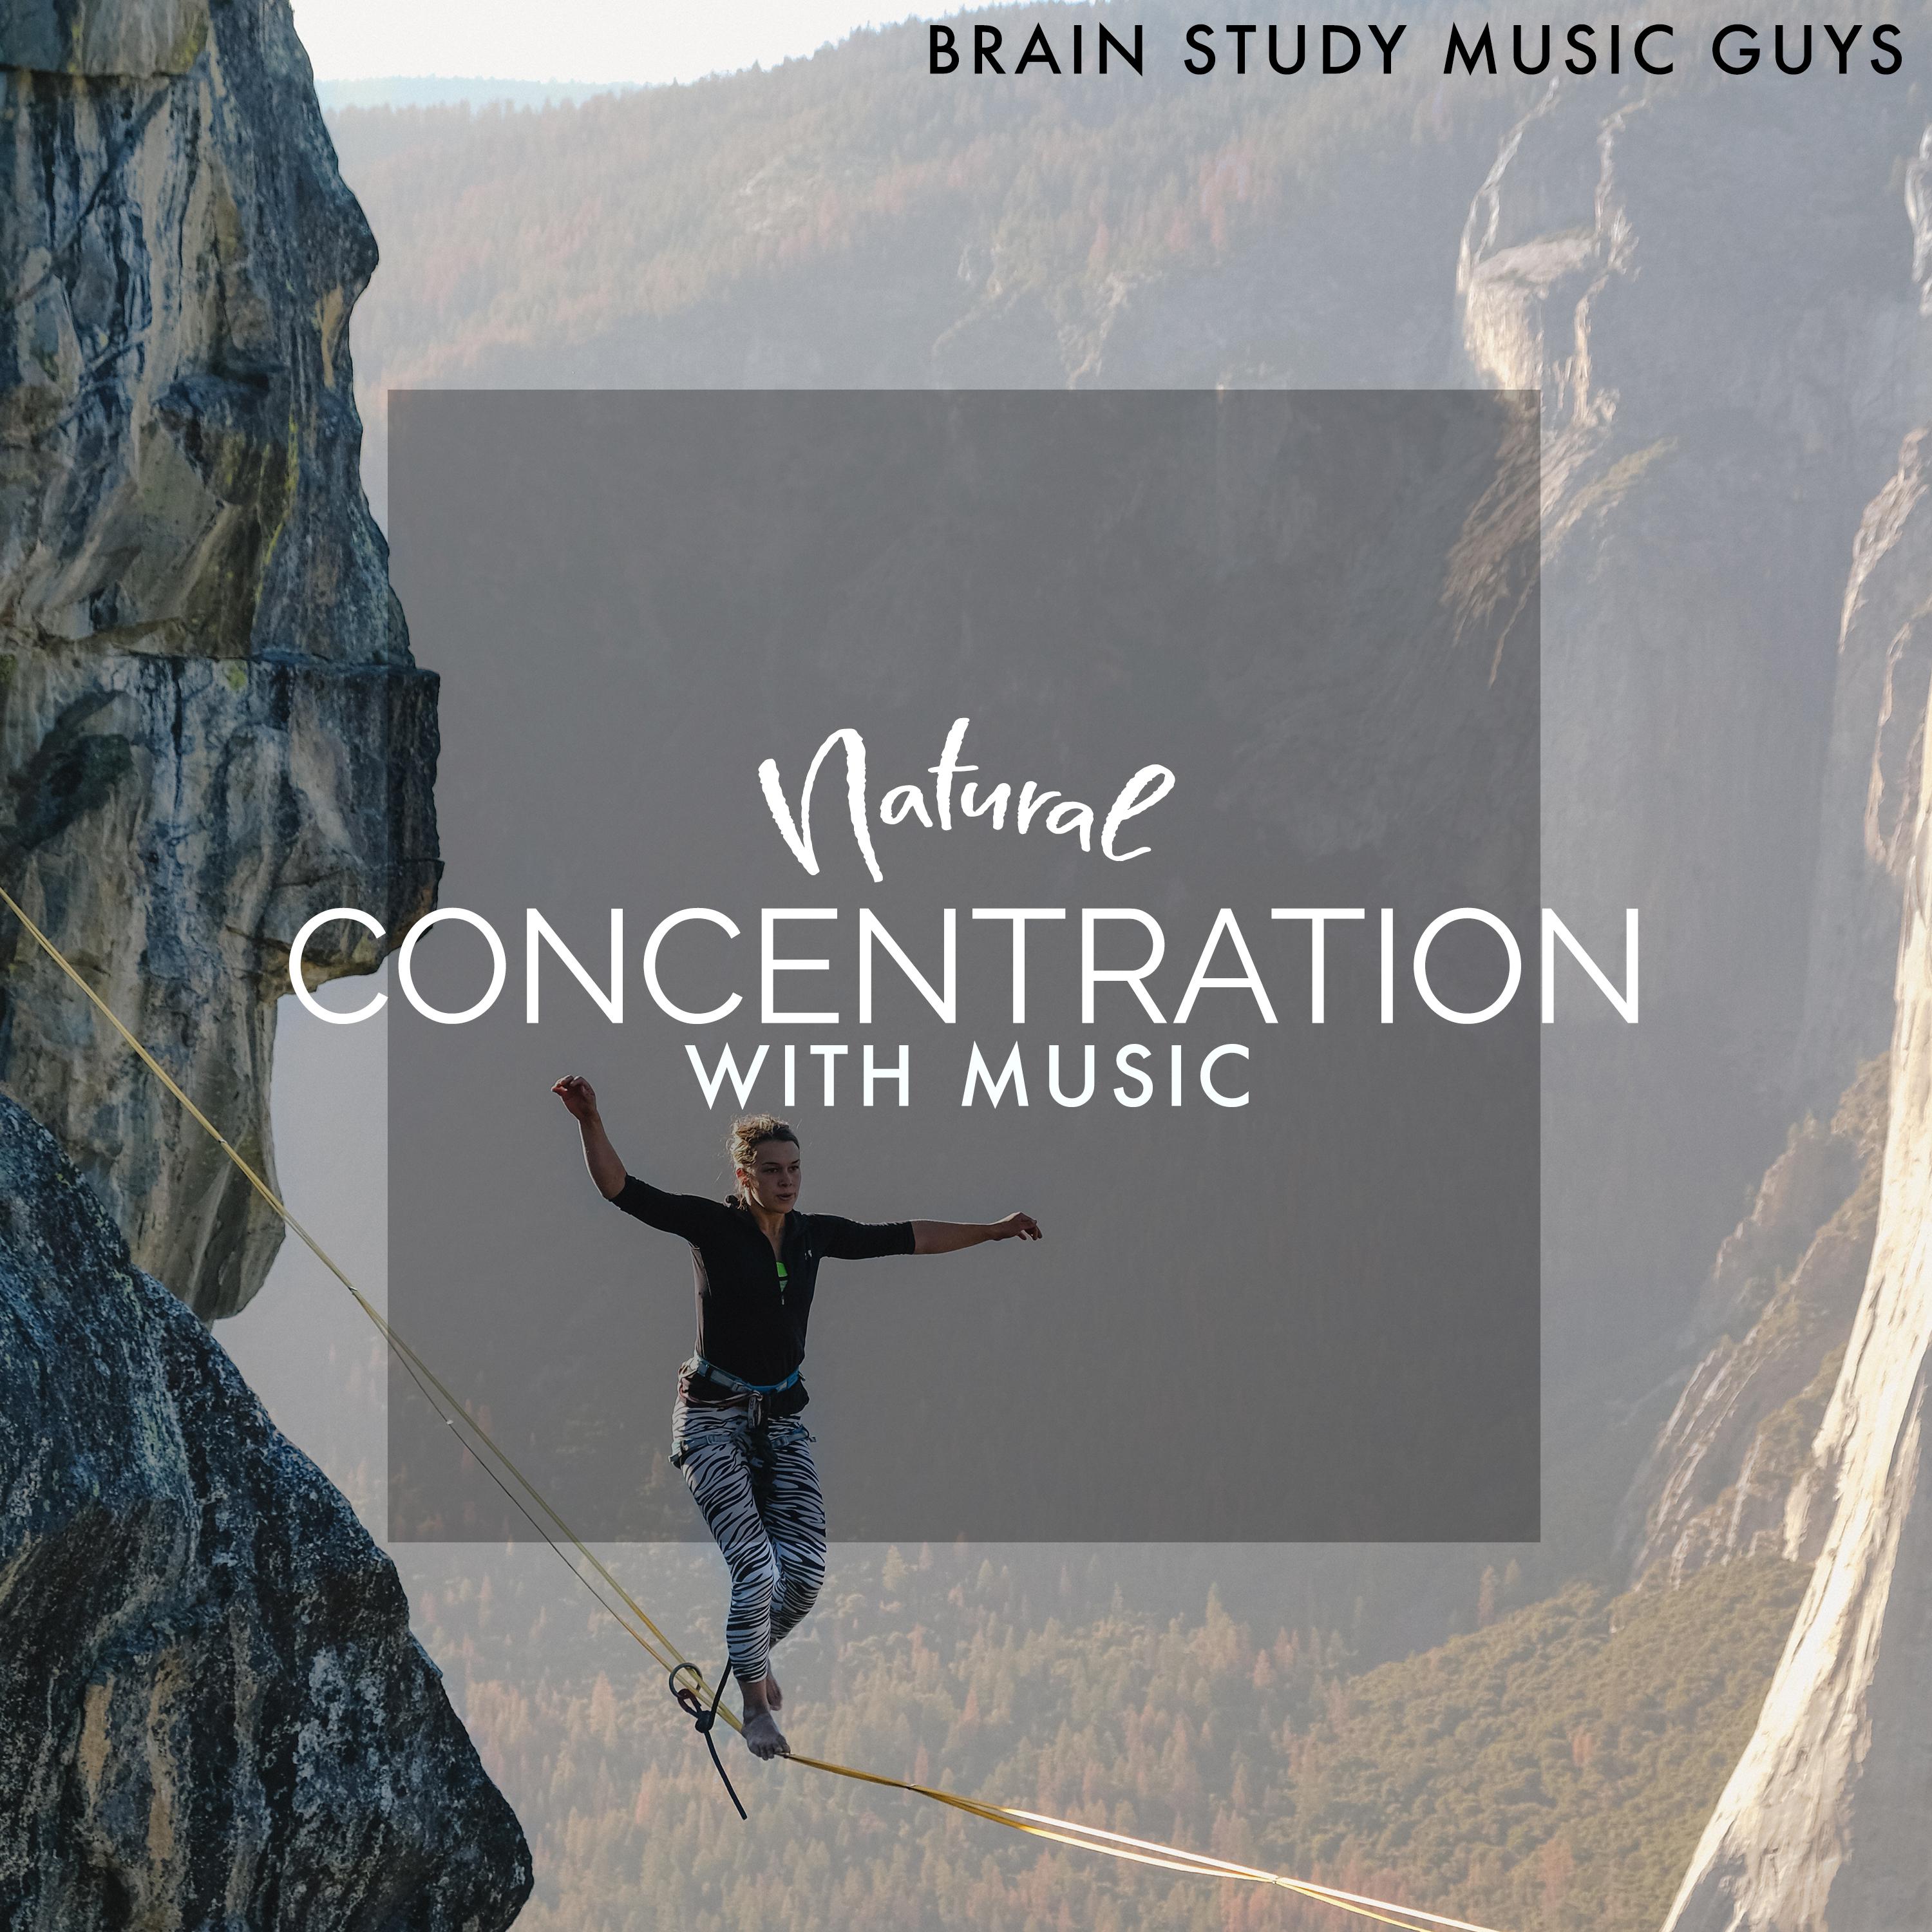 Natural Concentration with Music